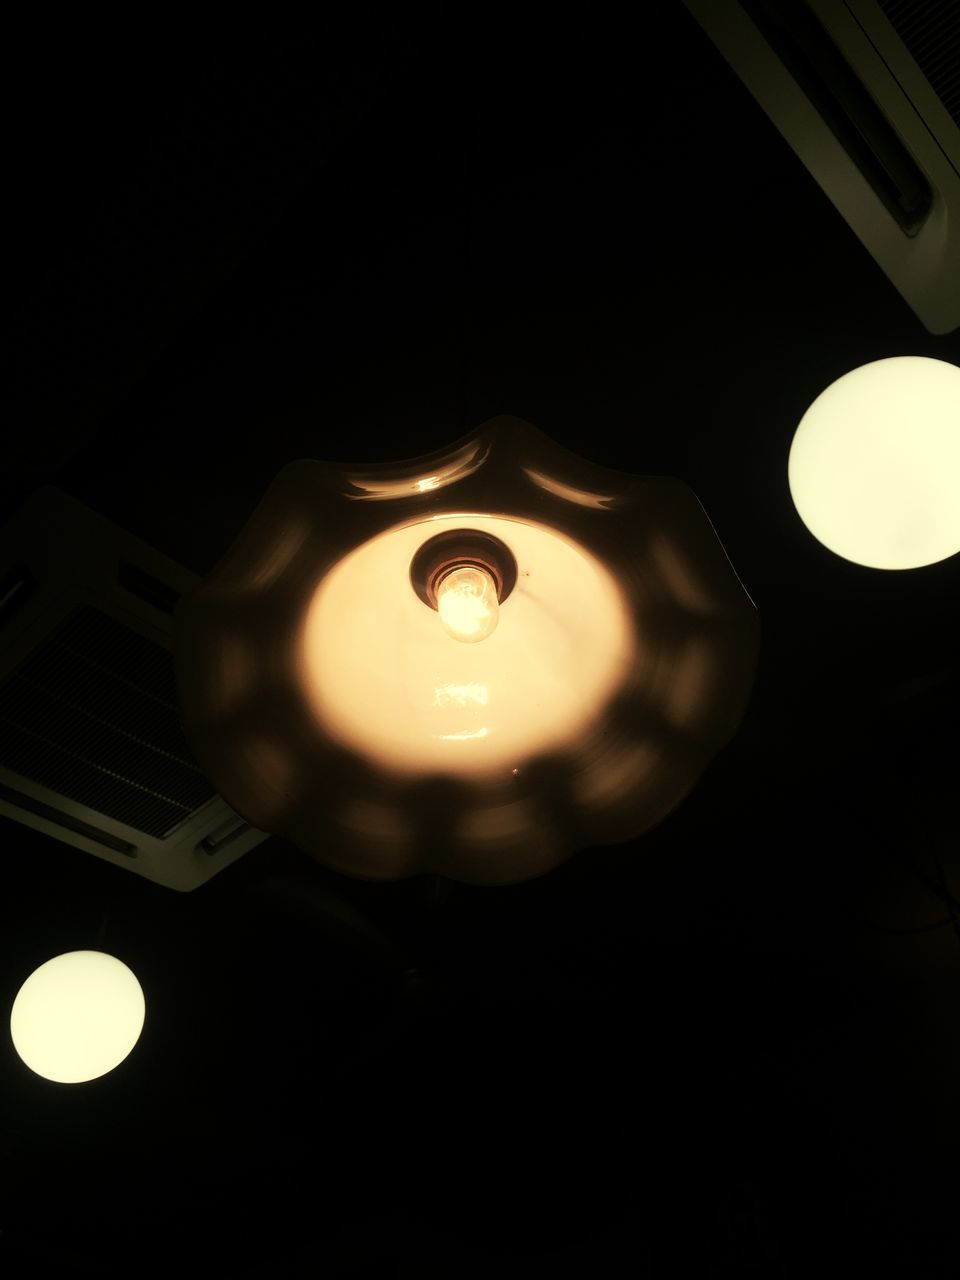 LOW ANGLE VIEW OF ILLUMINATED ELECTRIC LIGHT BULB AGAINST BLACK BACKGROUND